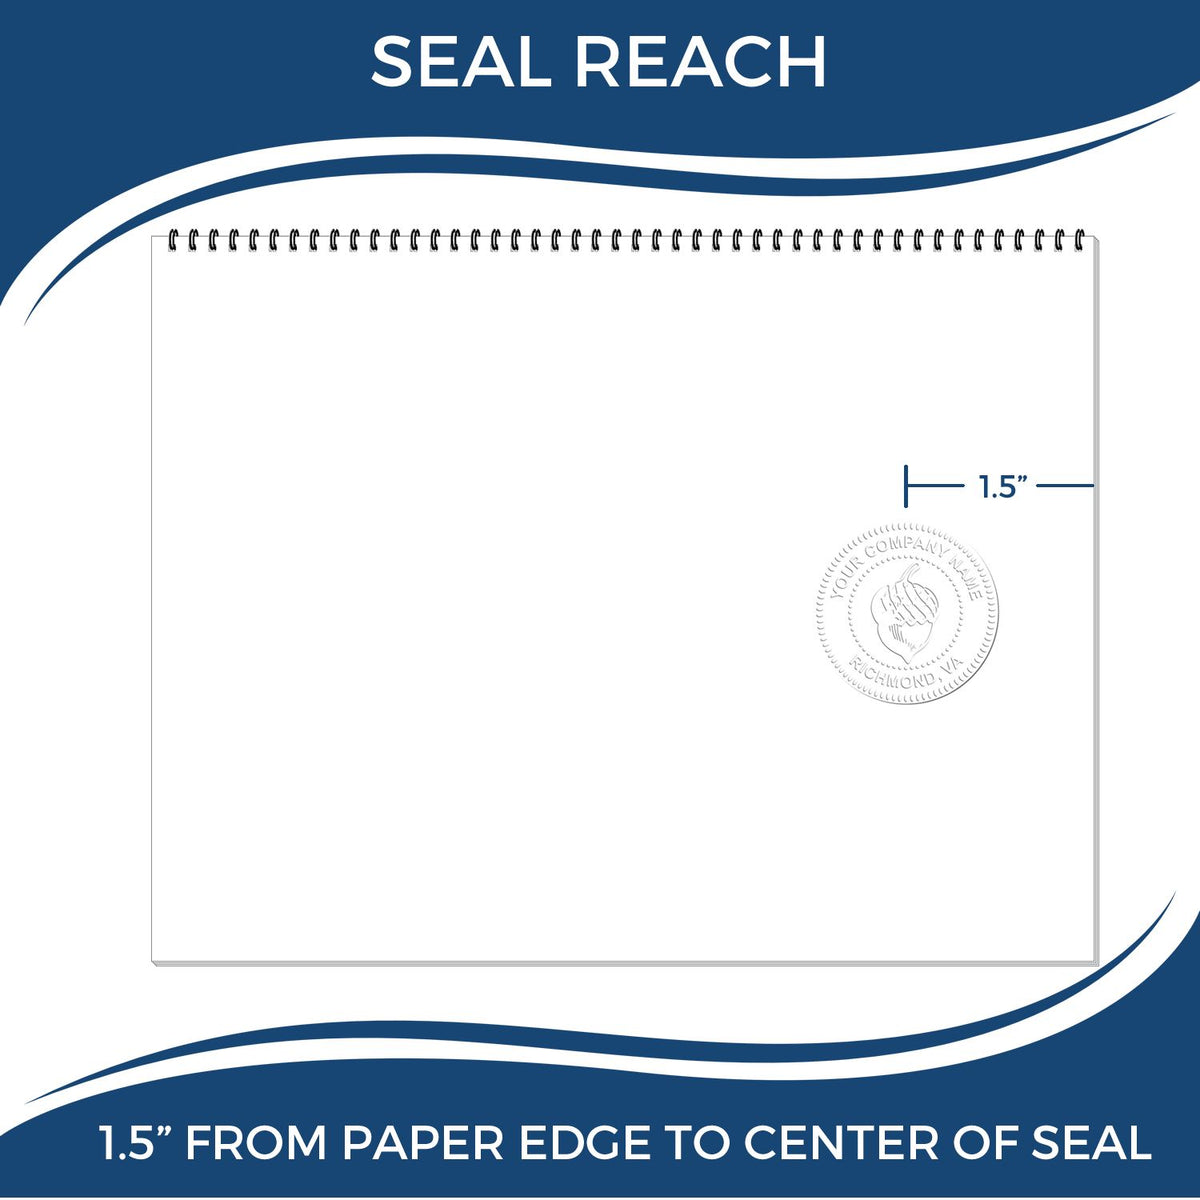 An infographic showing the seal reach which is represented by a ruler and a miniature seal image of the Handheld District of Columbia Professional Geologist Embosser